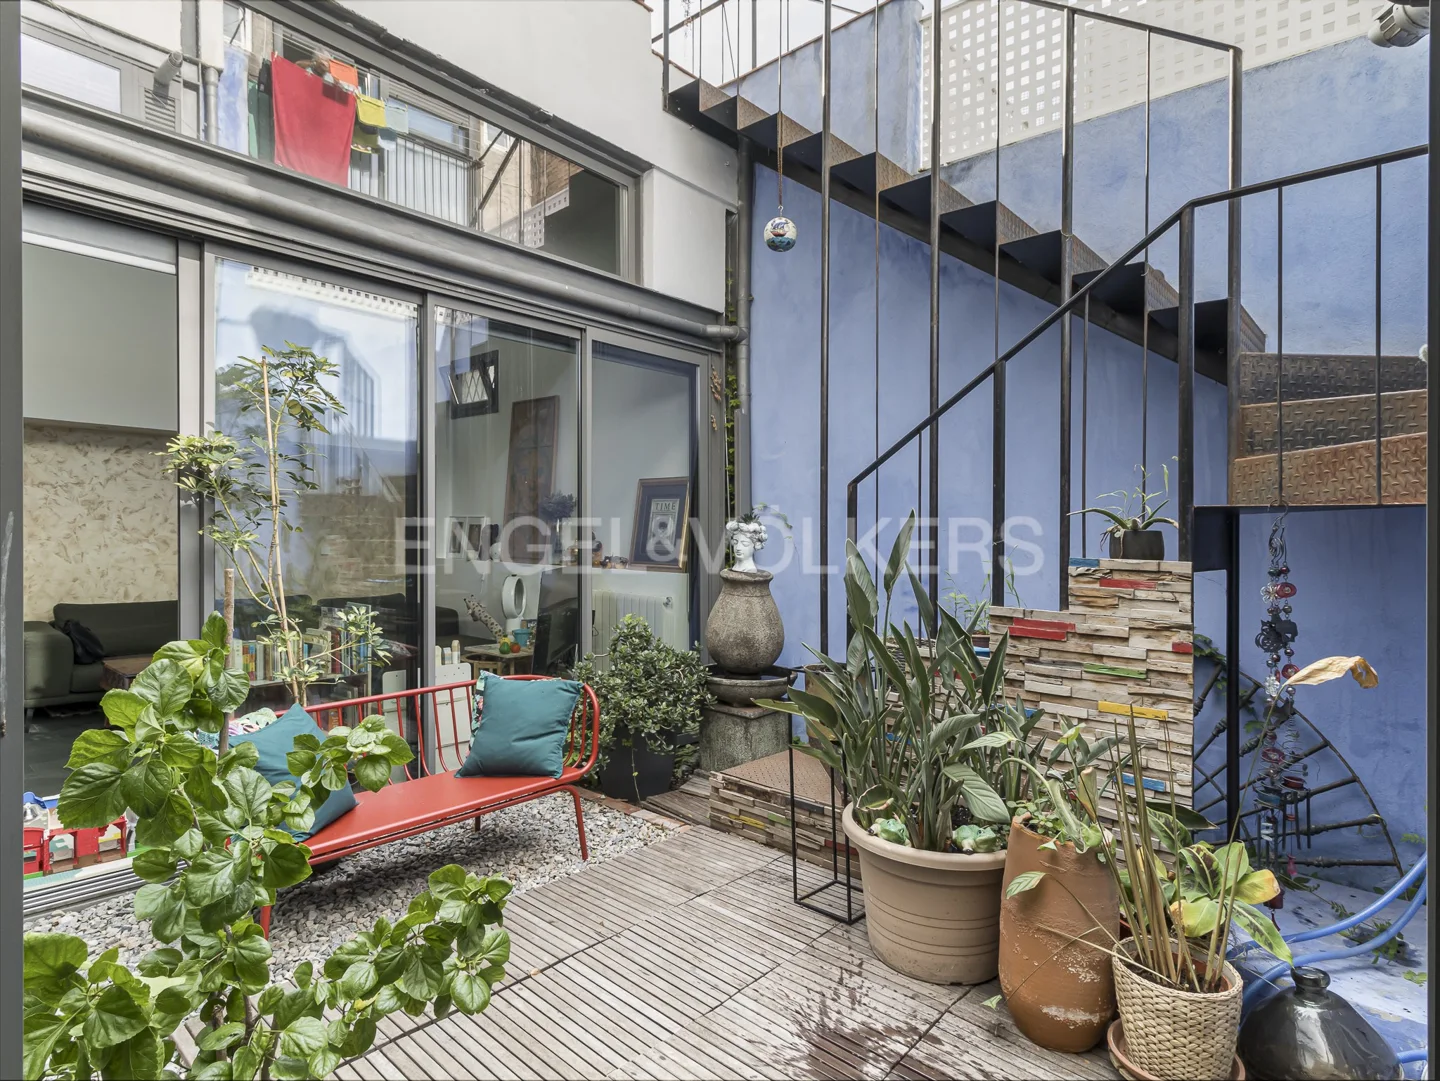 TWO properties with garden and terrace in Poblenou